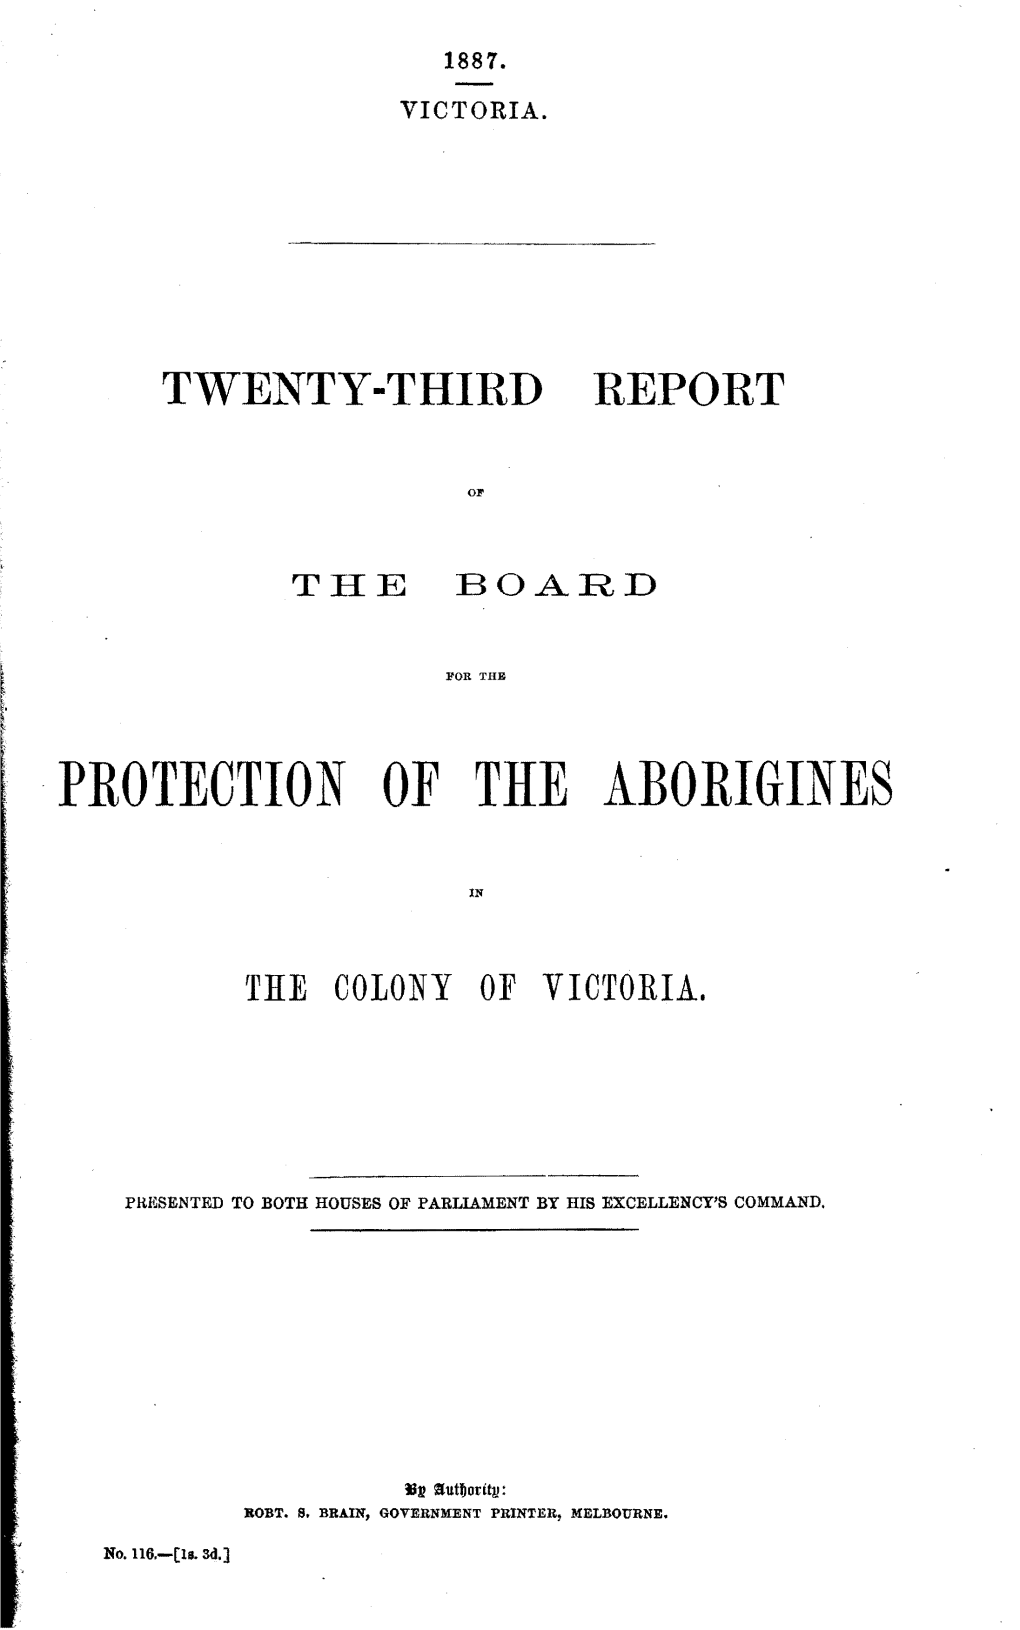 ·Protection of the Aborigines